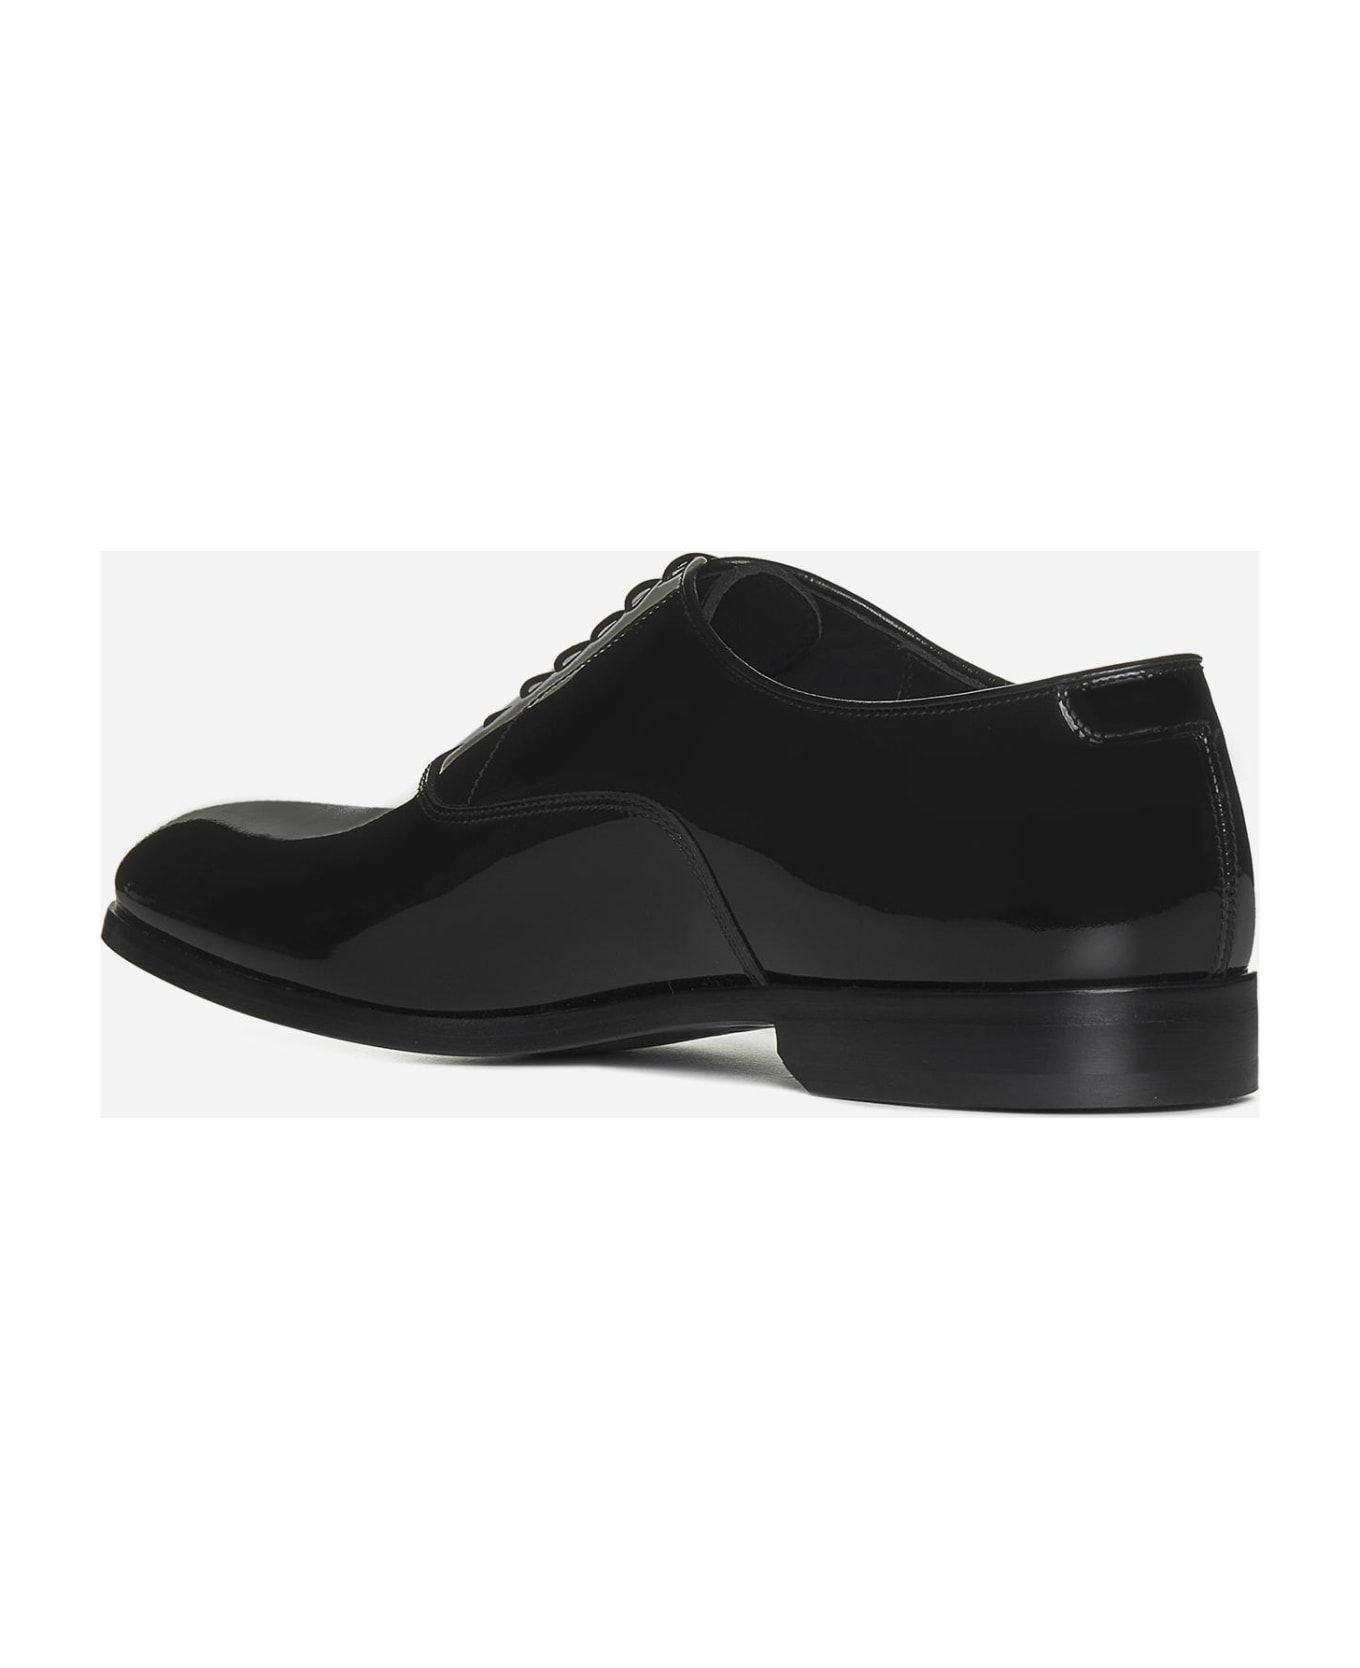 Doucal's Patent Leather Oxford Shoes - BLACK